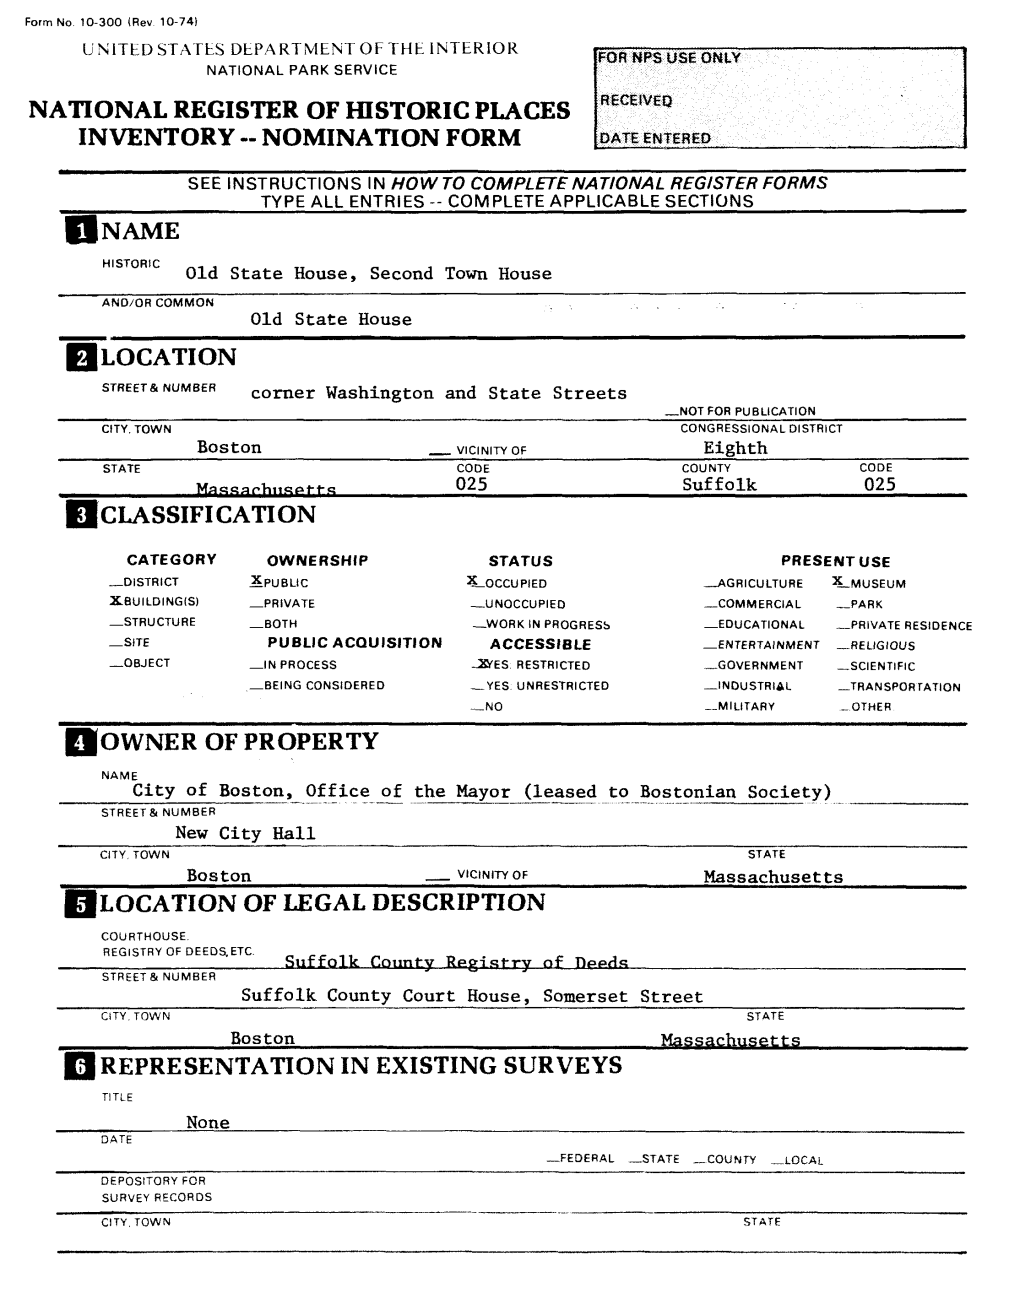 National Register of Historic Places Inventory - Nomination Form Idateentered„